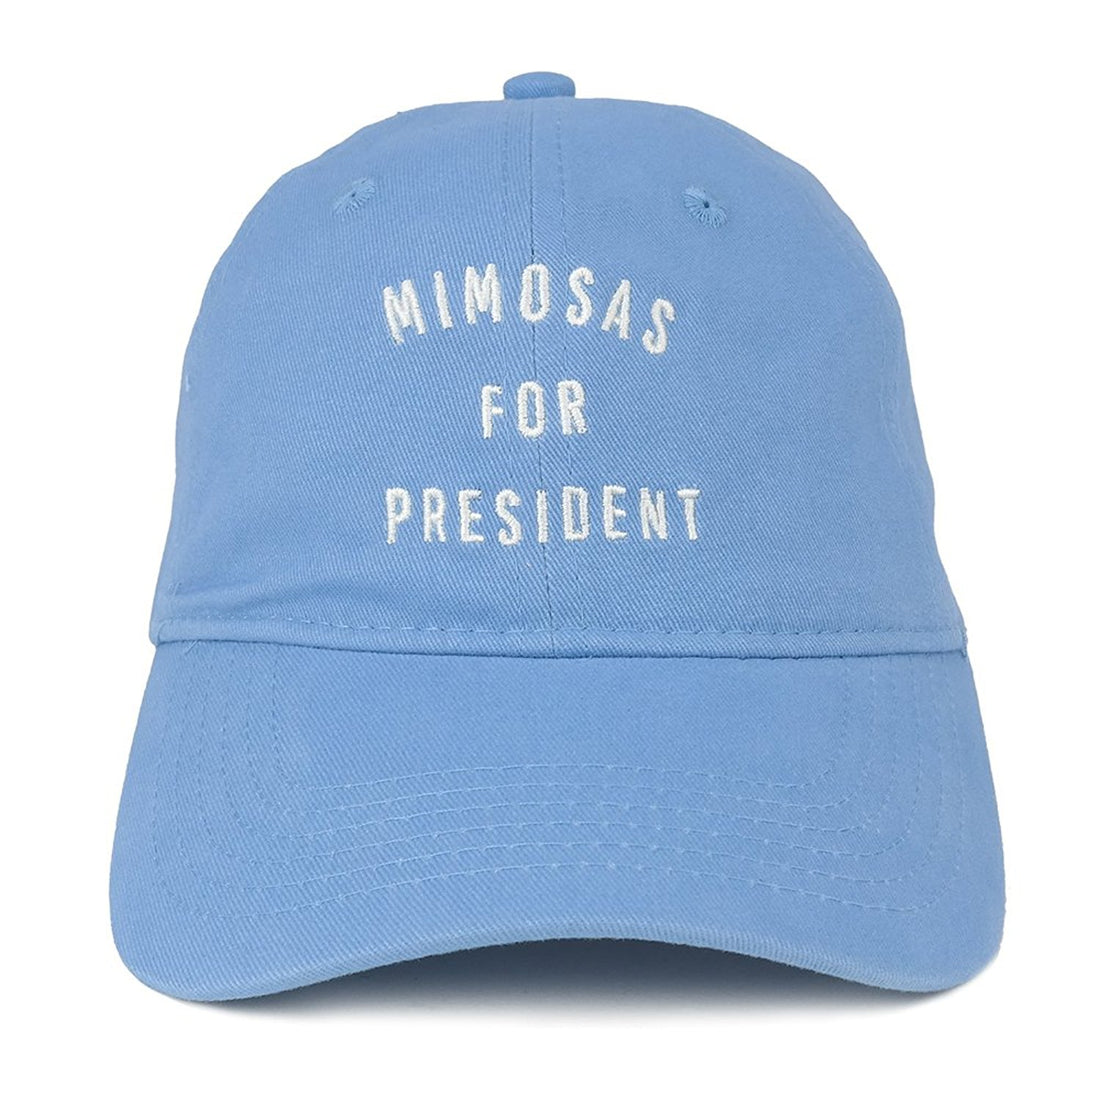 Trendy Apparel Shop Mimosas For President Embroidered 100% Cotton Adjustable Cap